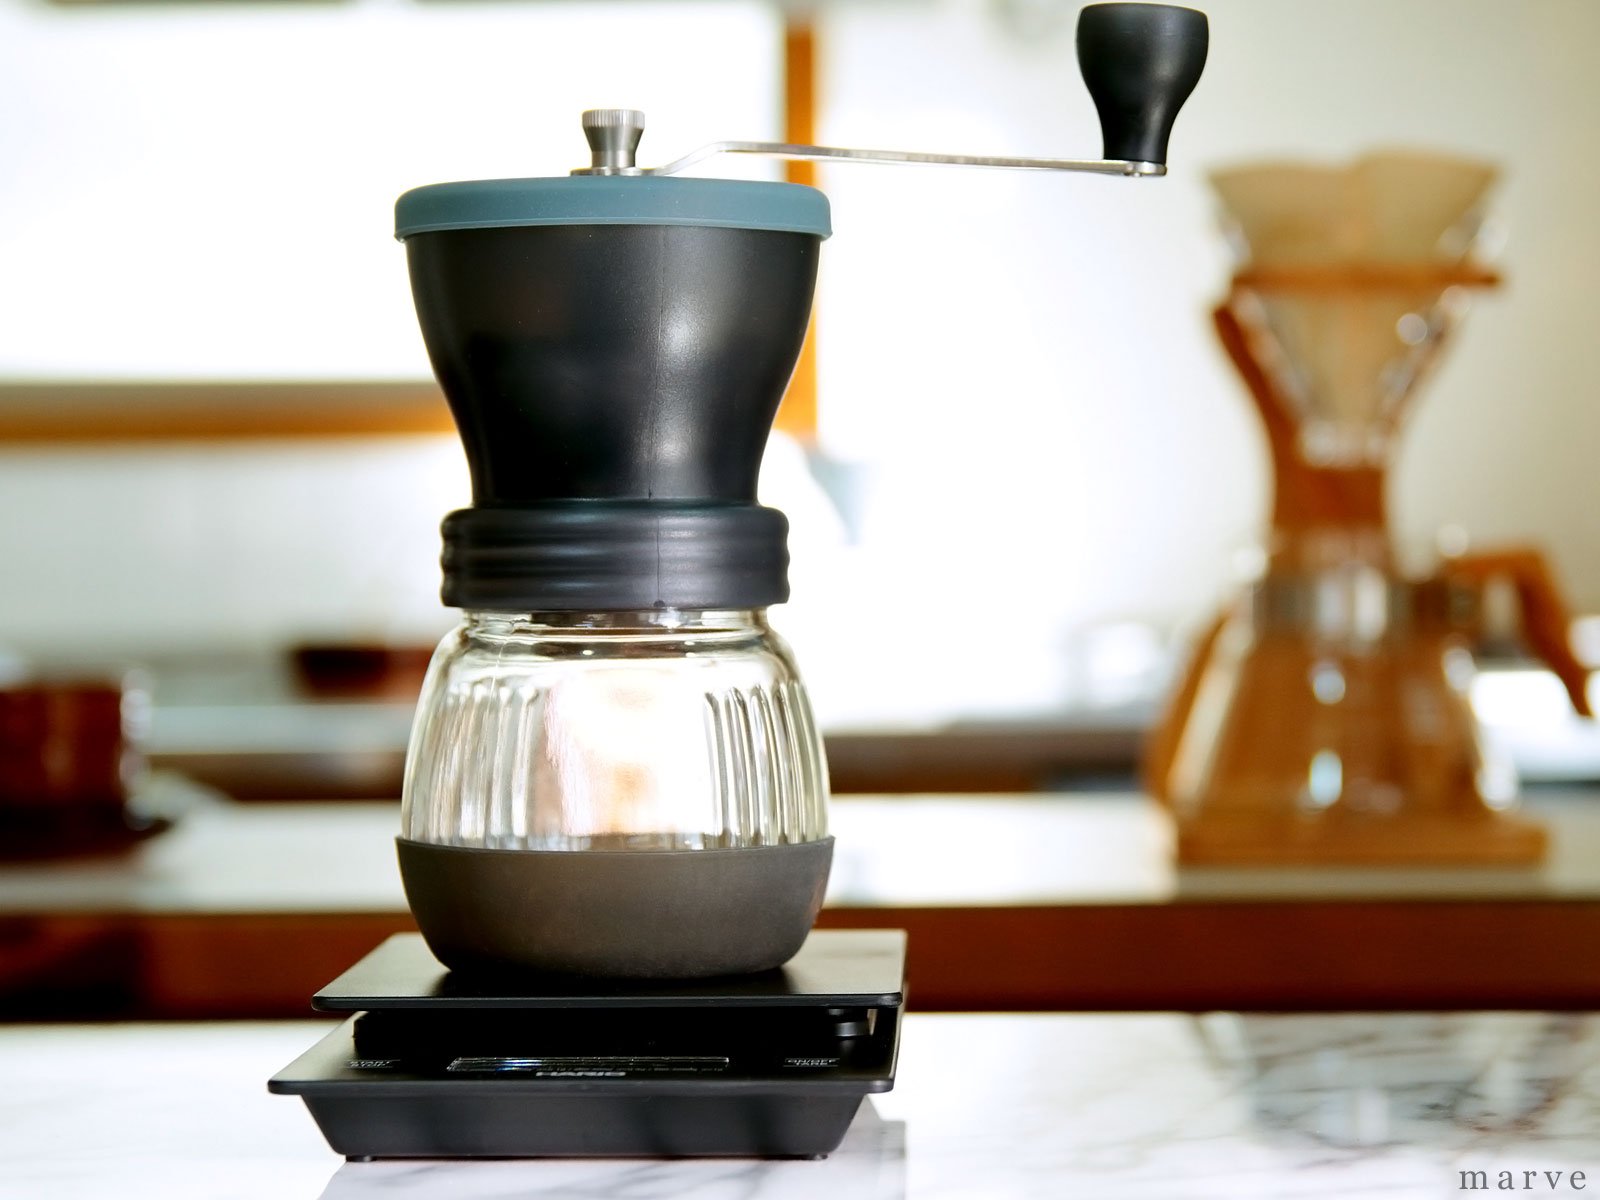 HARIO V60　ドリップスケール<img class='new_mark_img2' src='https://img.shop-pro.jp/img/new/icons55.gif' style='border:none;display:inline;margin:0px;padding:0px;width:auto;' />